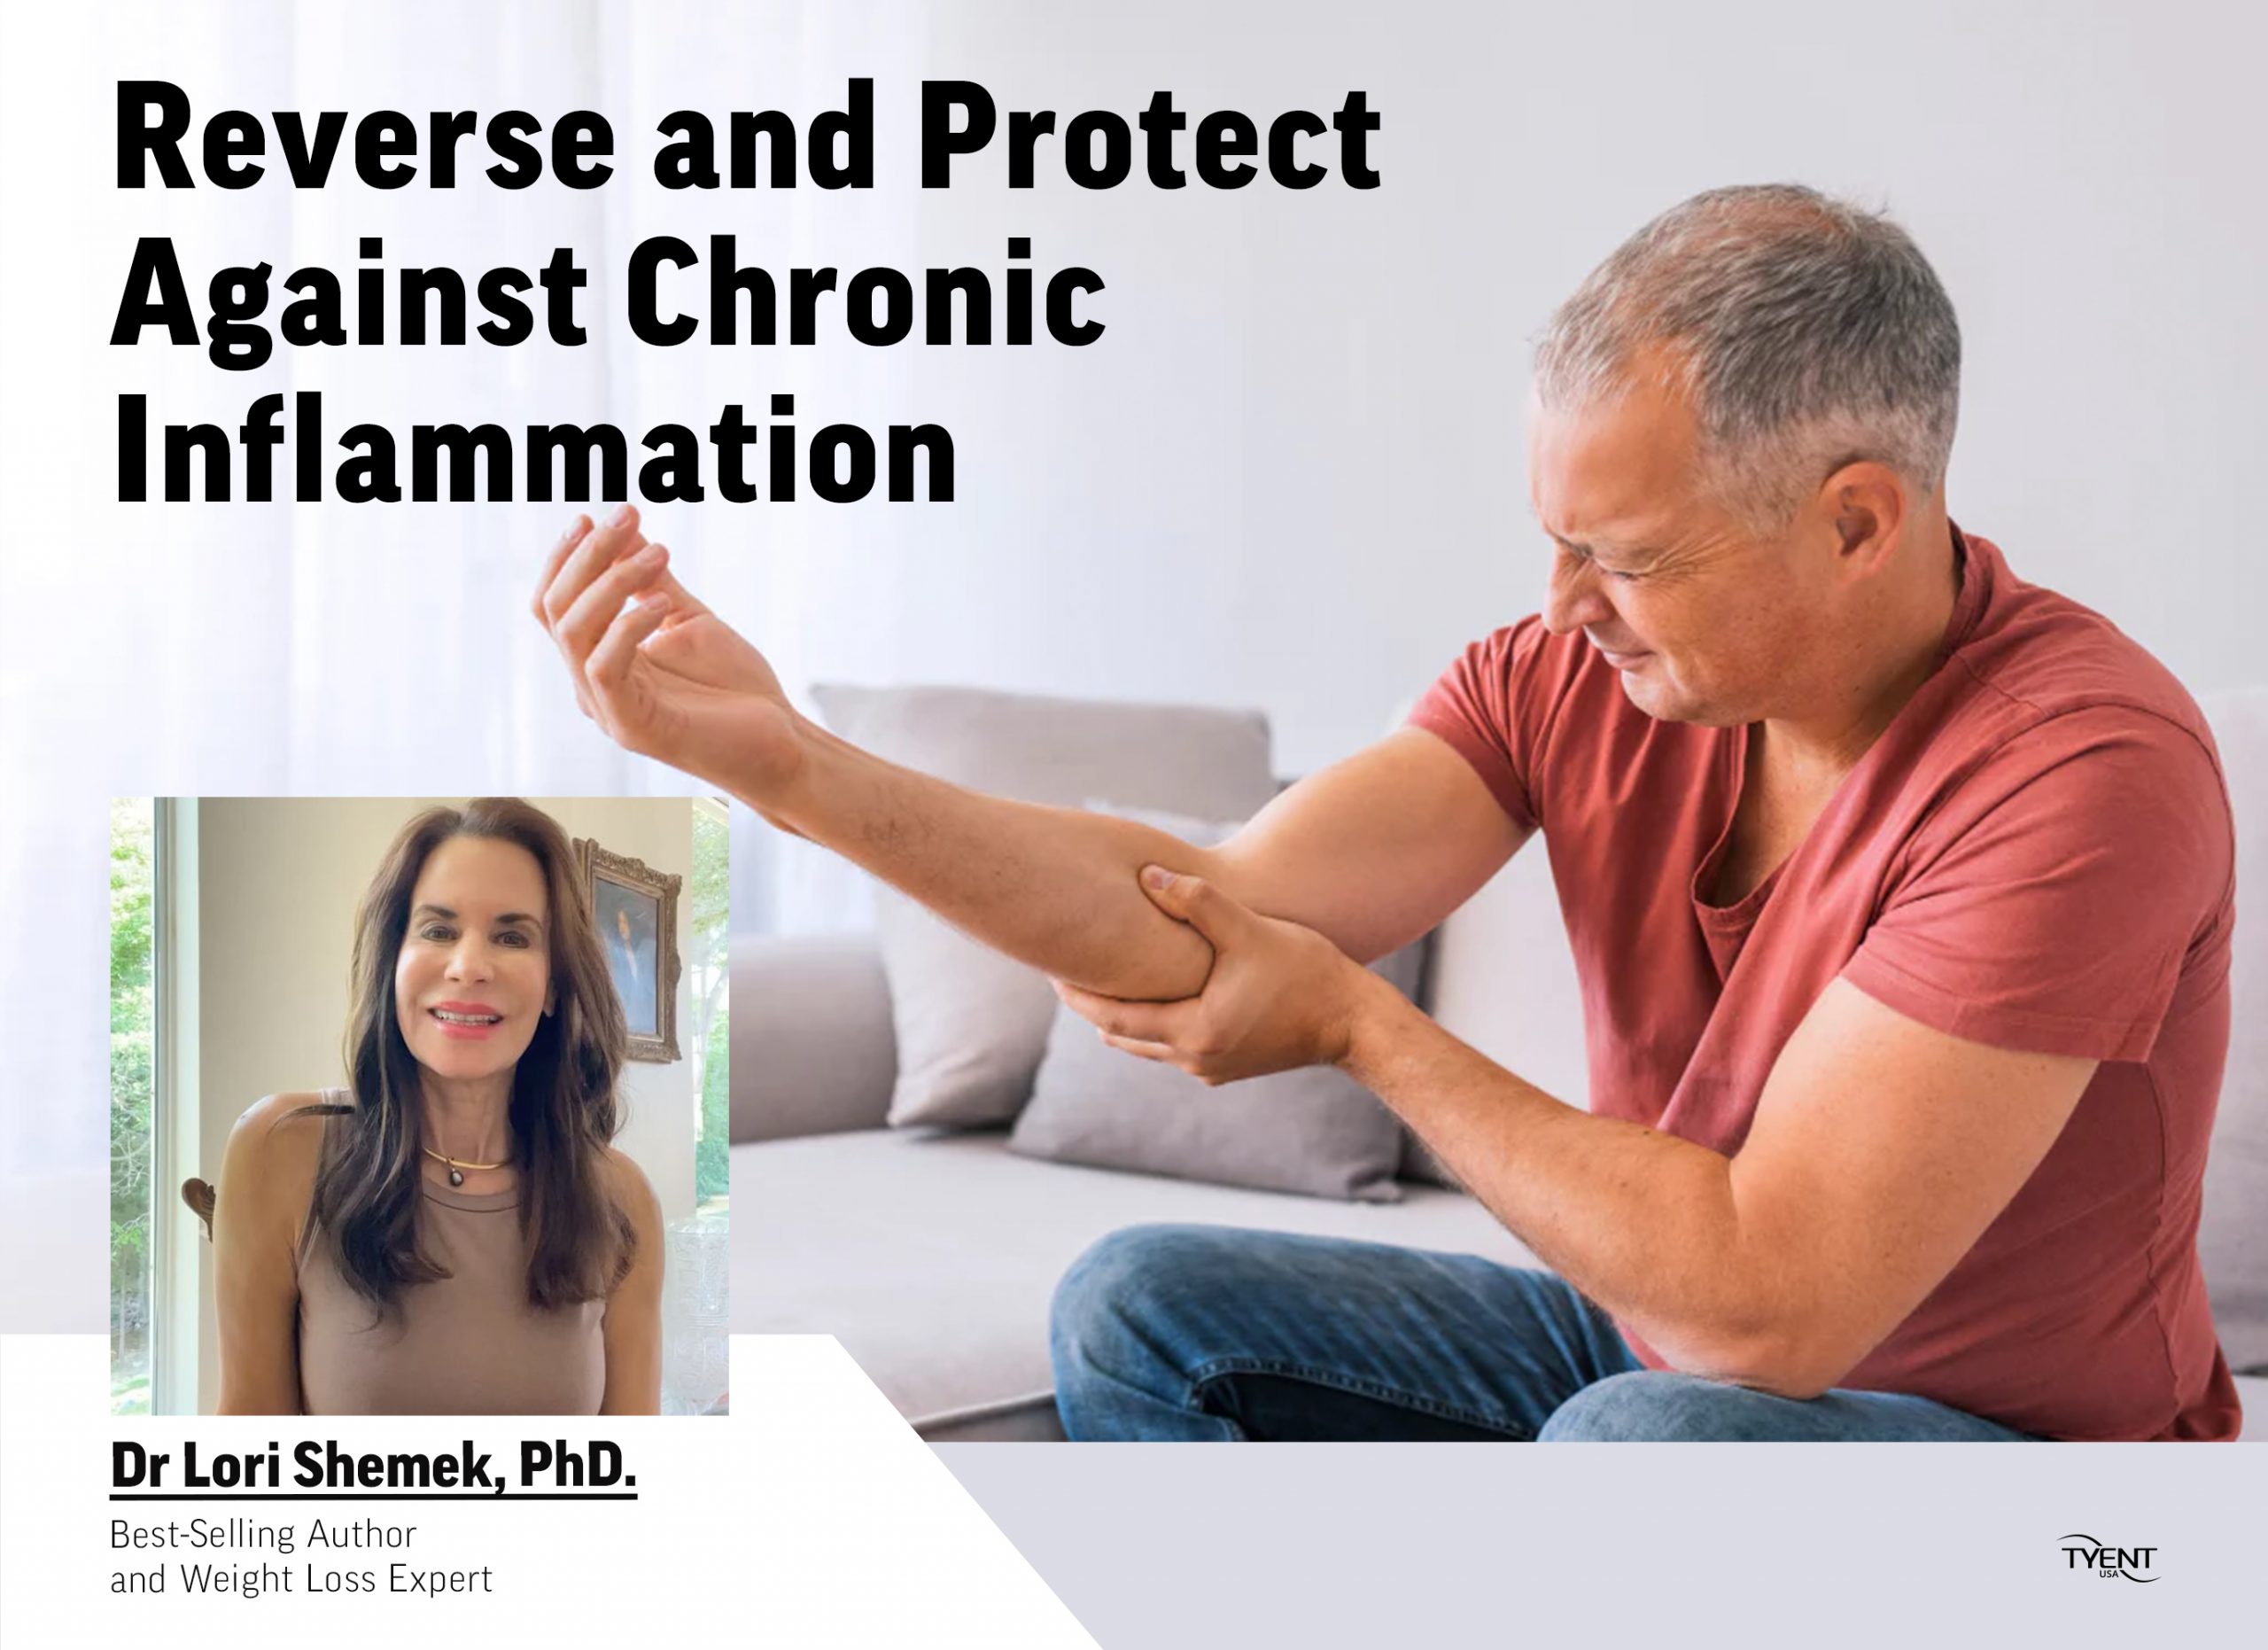 Reverse and Protect Against Chronic Inflammation